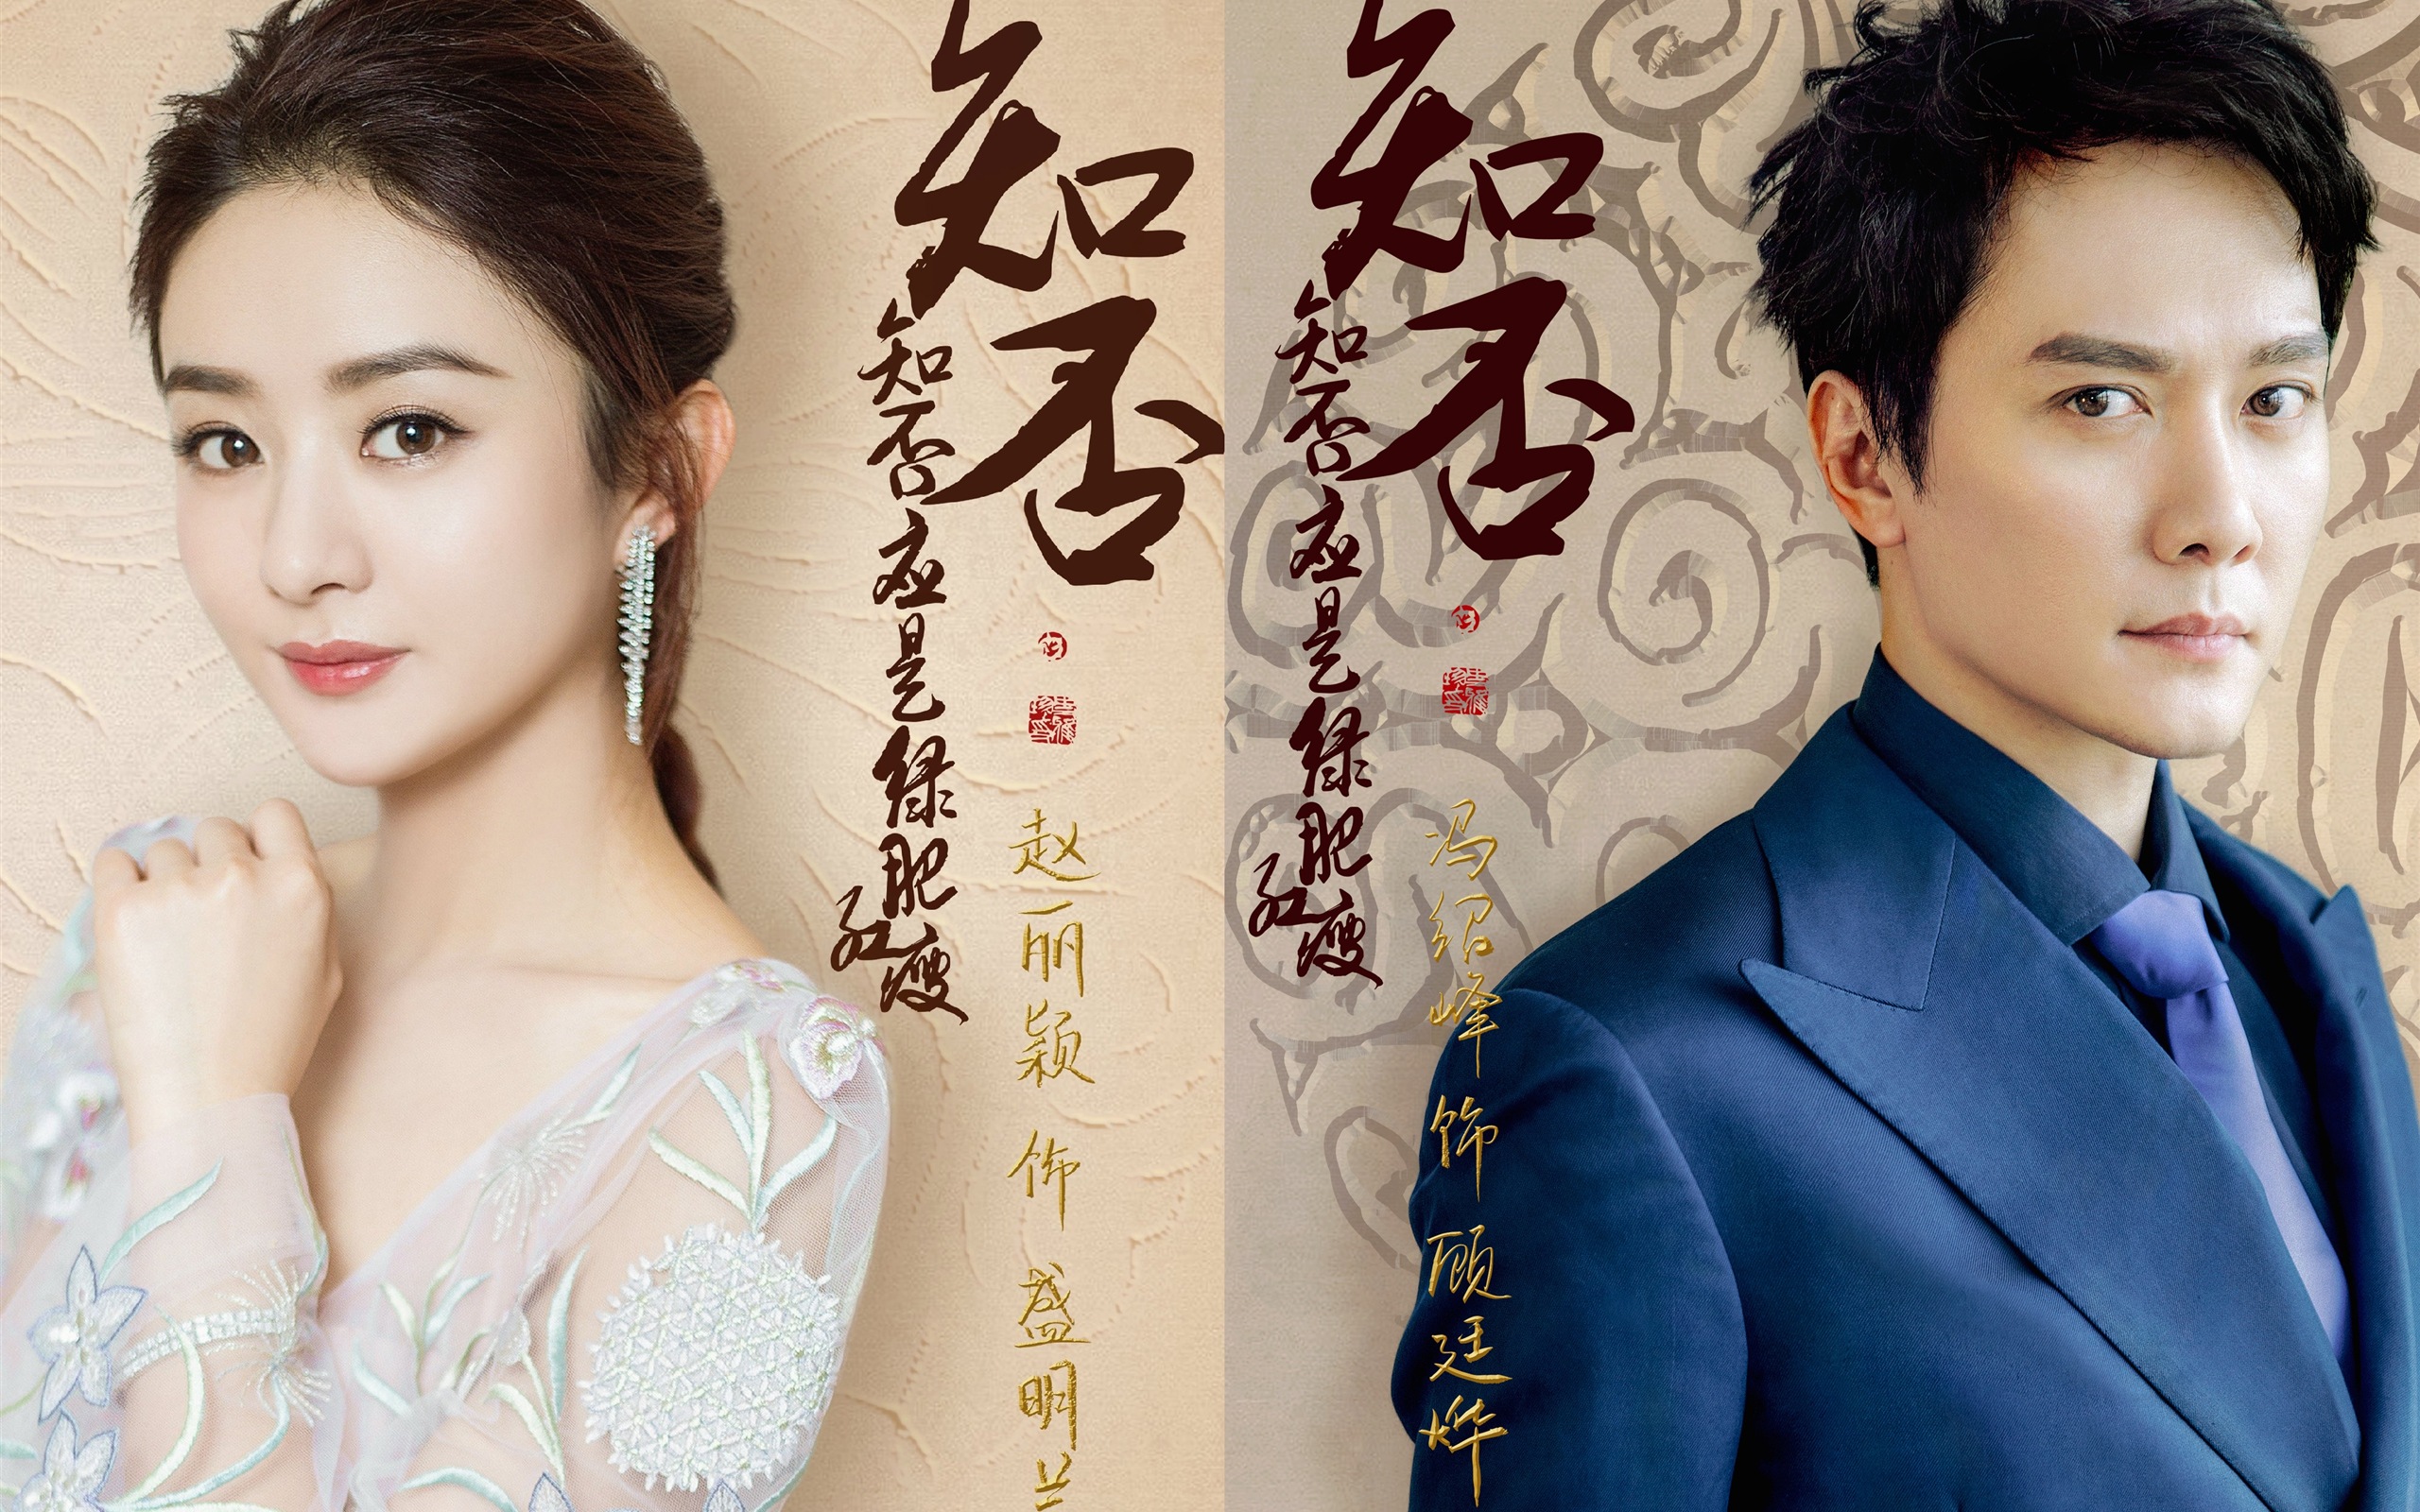 The Story Of MingLan, TV series HD wallpapers #46 - 2560x1600